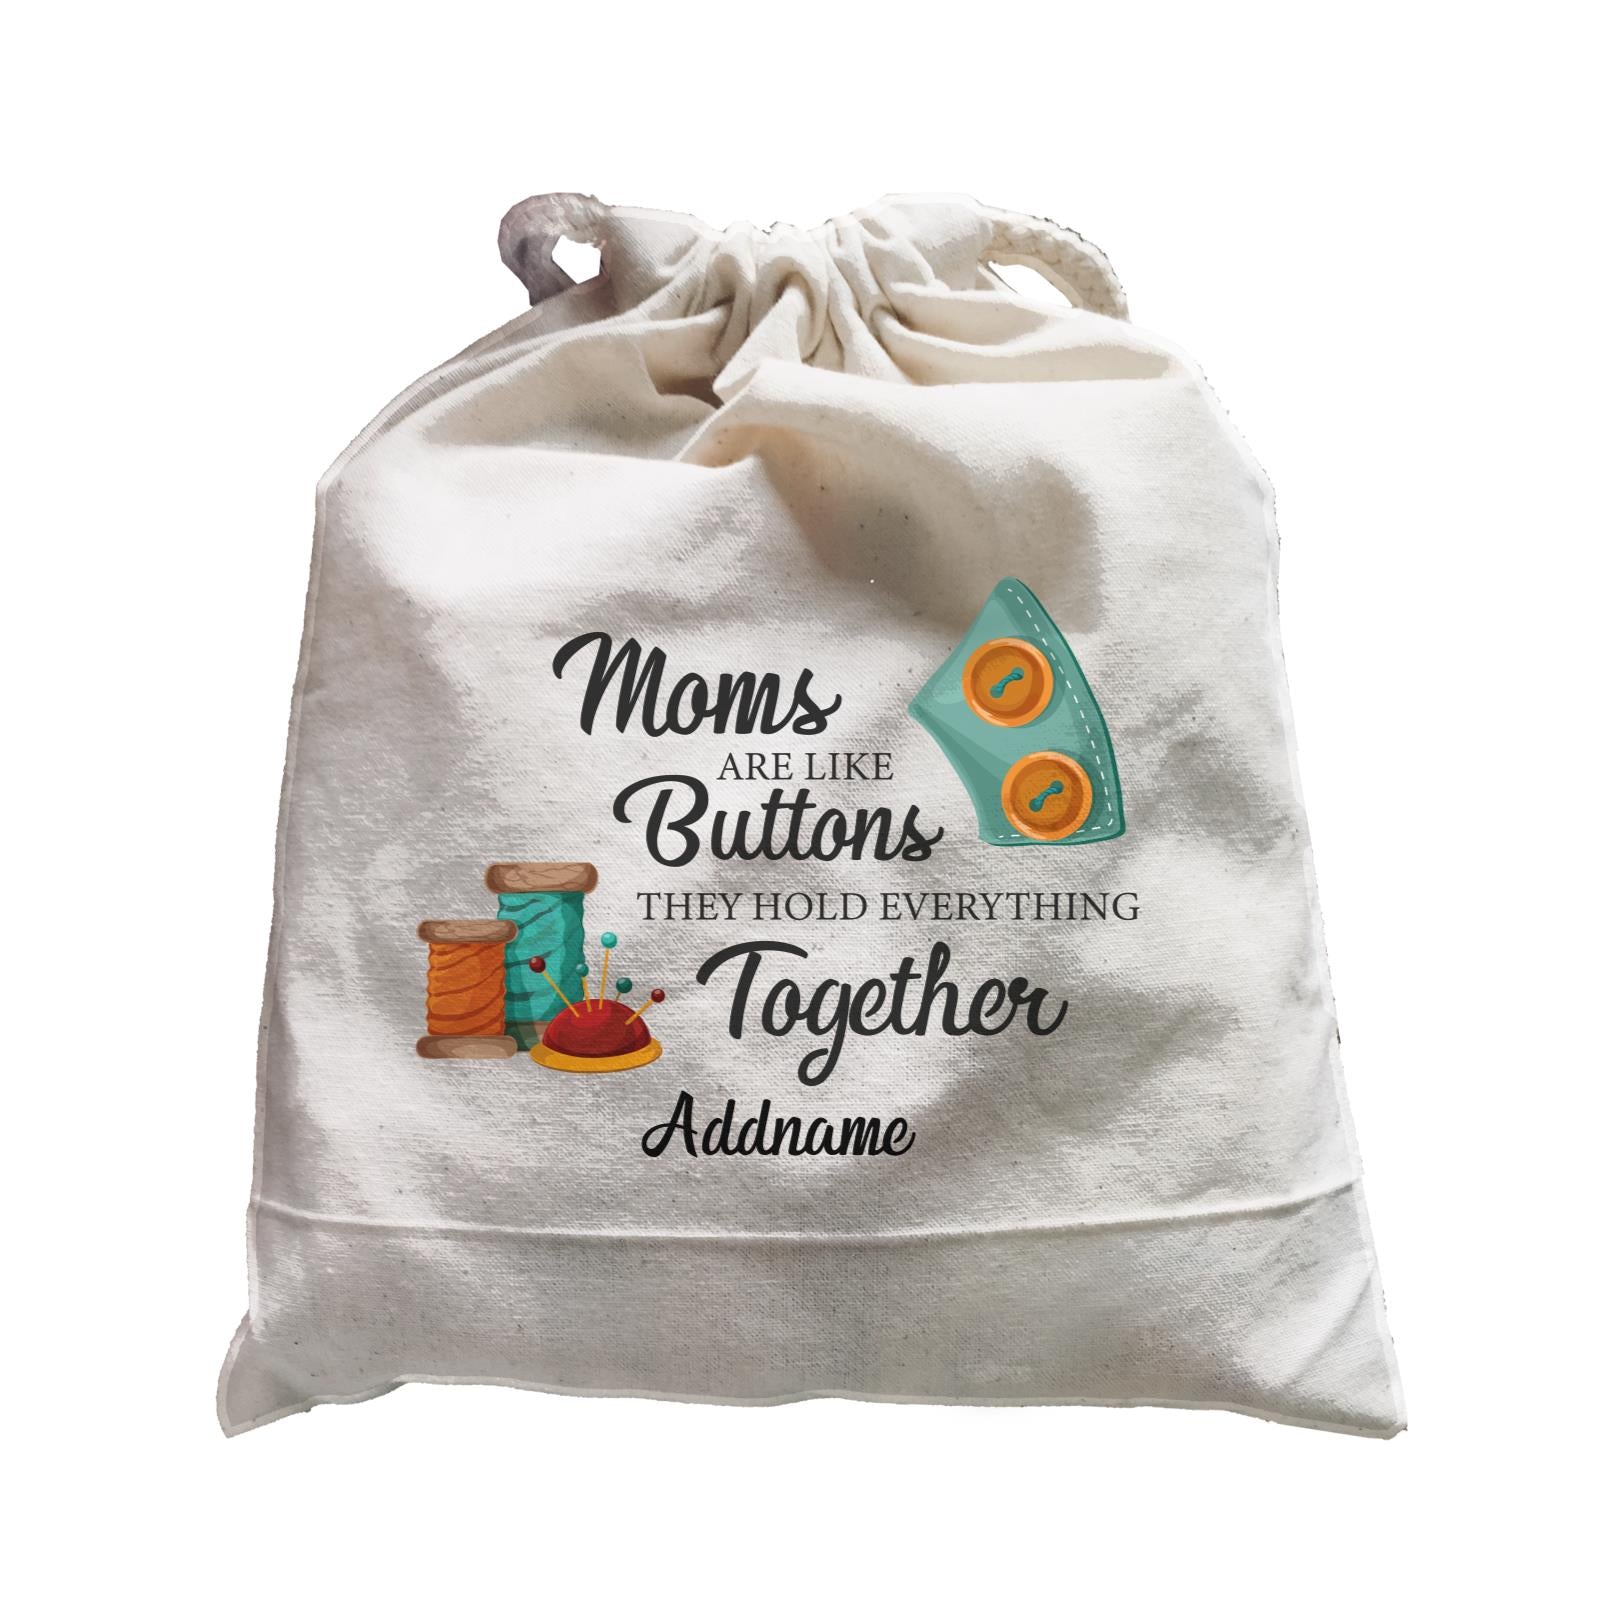 Sweet Mom Quotes 2 Moms Are Like Buttons They Hold Everything Together Addname Accessories Satchel